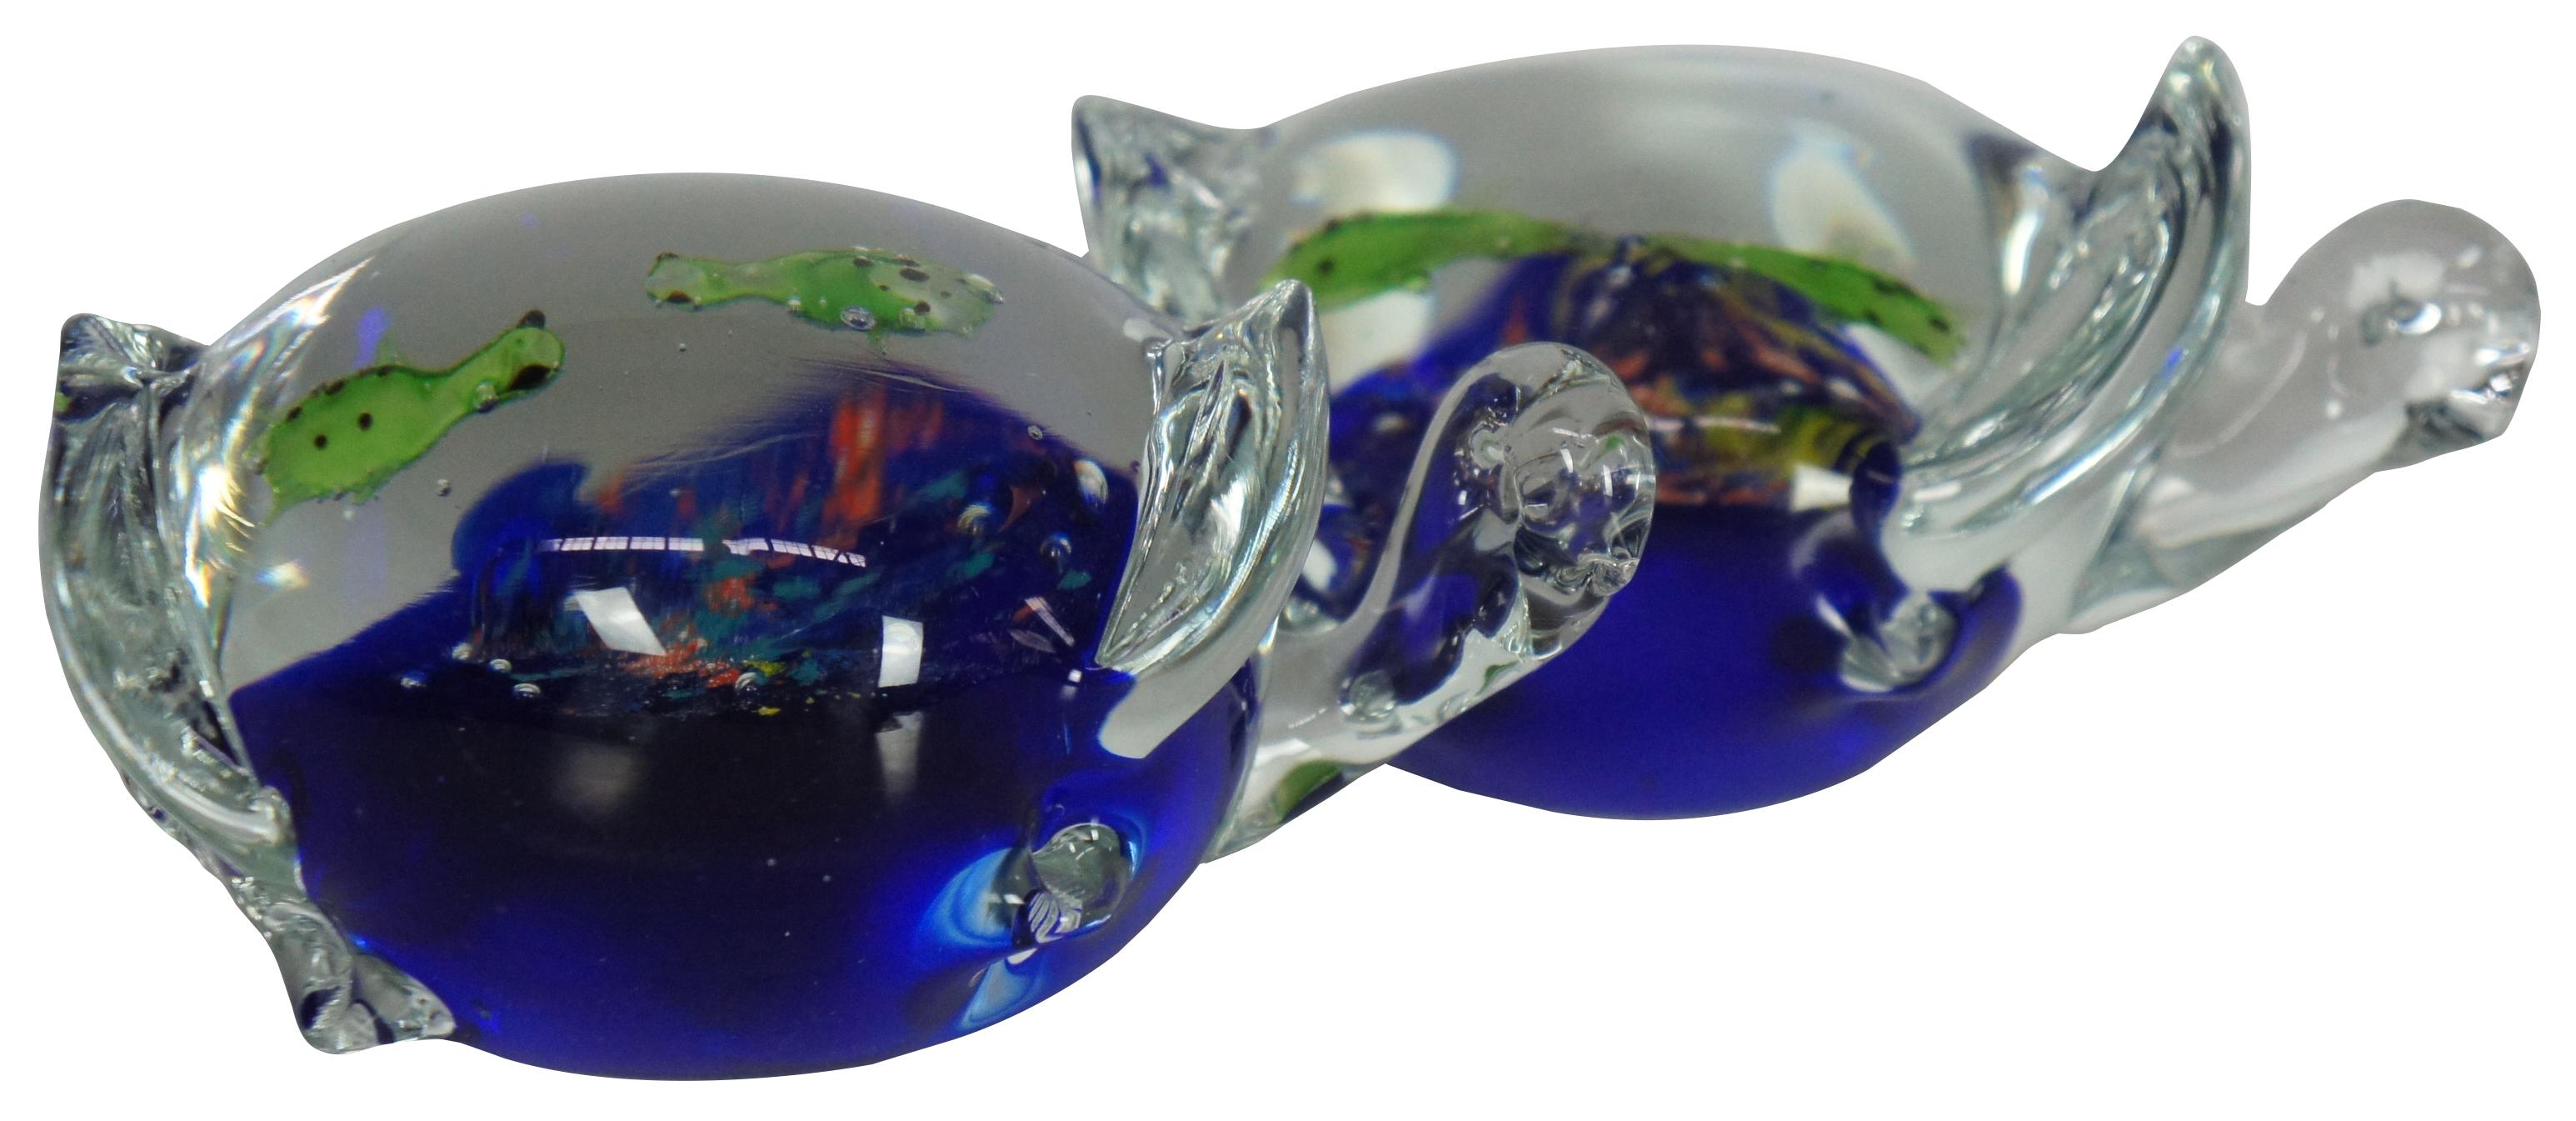 Pair of hand blown Italian art glass figurines / paperweights or hand chillers in the shape of sea turtles with a miniature aquarium scene of two more turtles inside their shells. Measure: 5